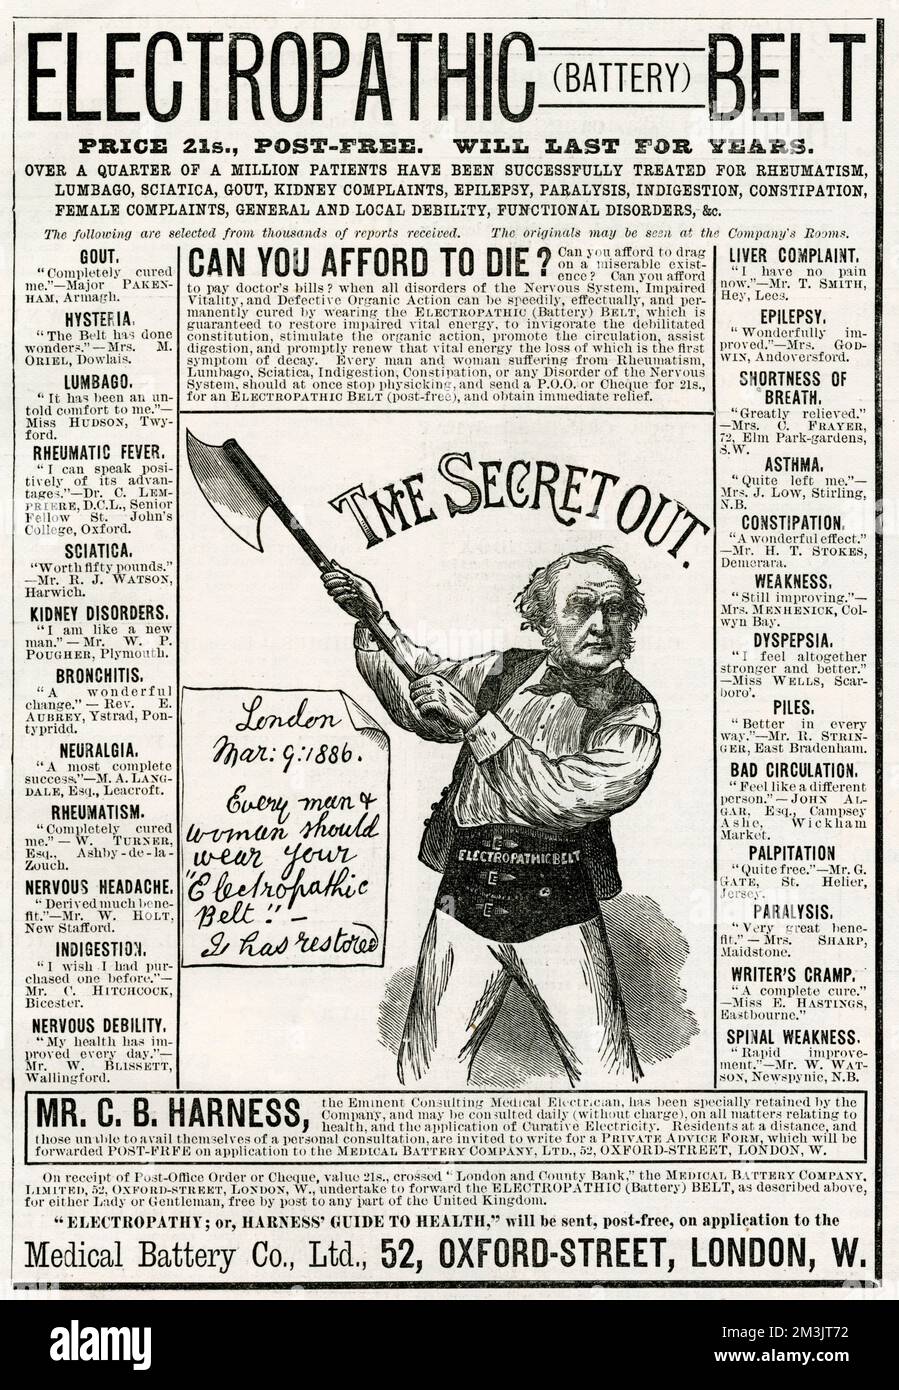 Advertisement from 1886 for the Medical Battery Company's Electropathic Belt, featuring a caricature of William Gladstone, Prime Minister wielding an axe and wearing the belt. Electrical remedies of this time, which made extravagant claims to cure practically all ailments, were typical of the late nineteenth century. Stock Photo